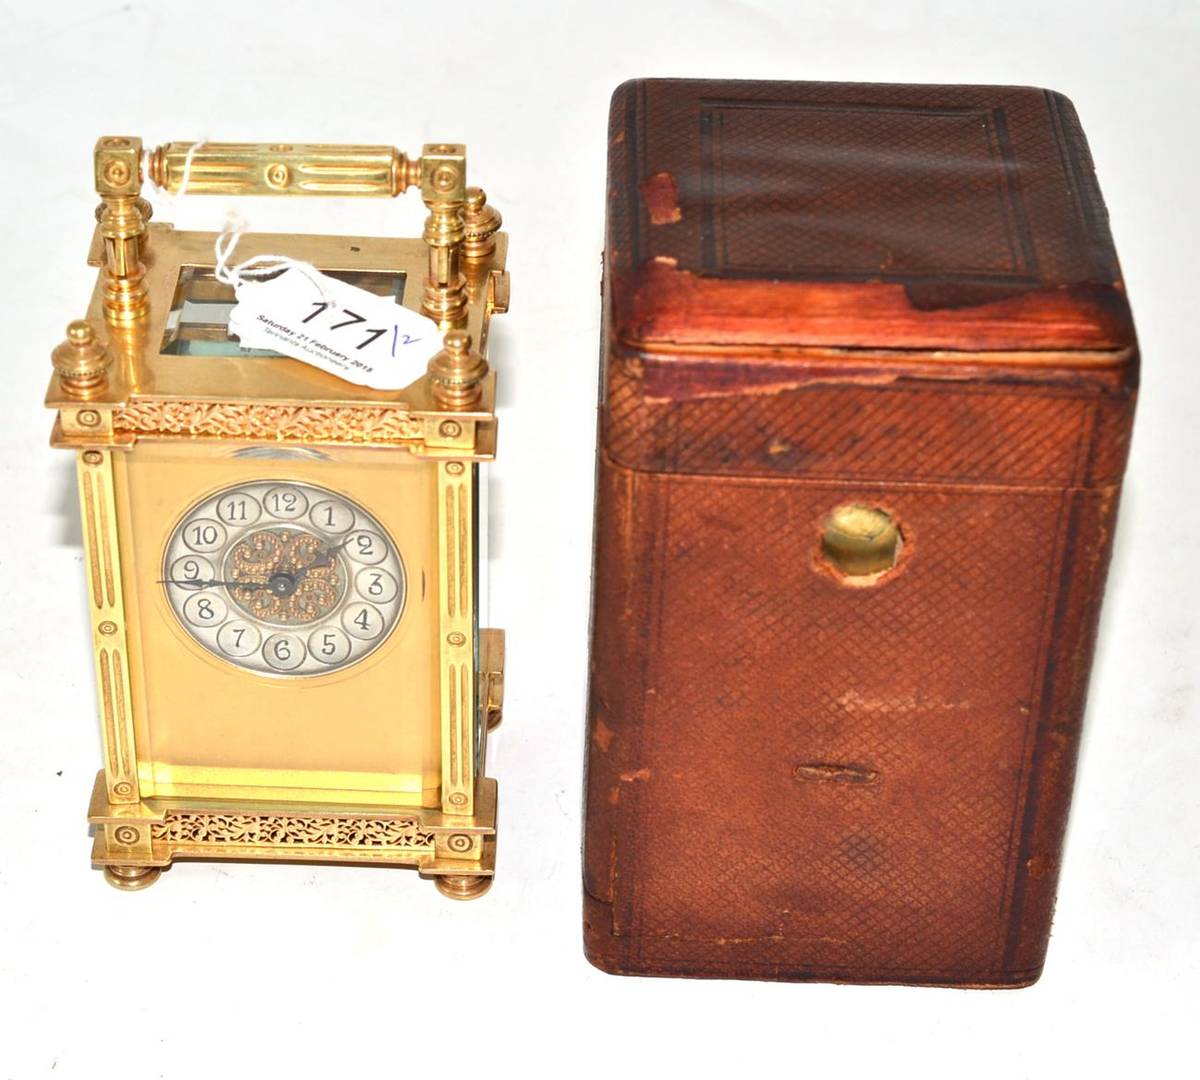 Lot 171 - A carriage timepiece in fitted case with winding key